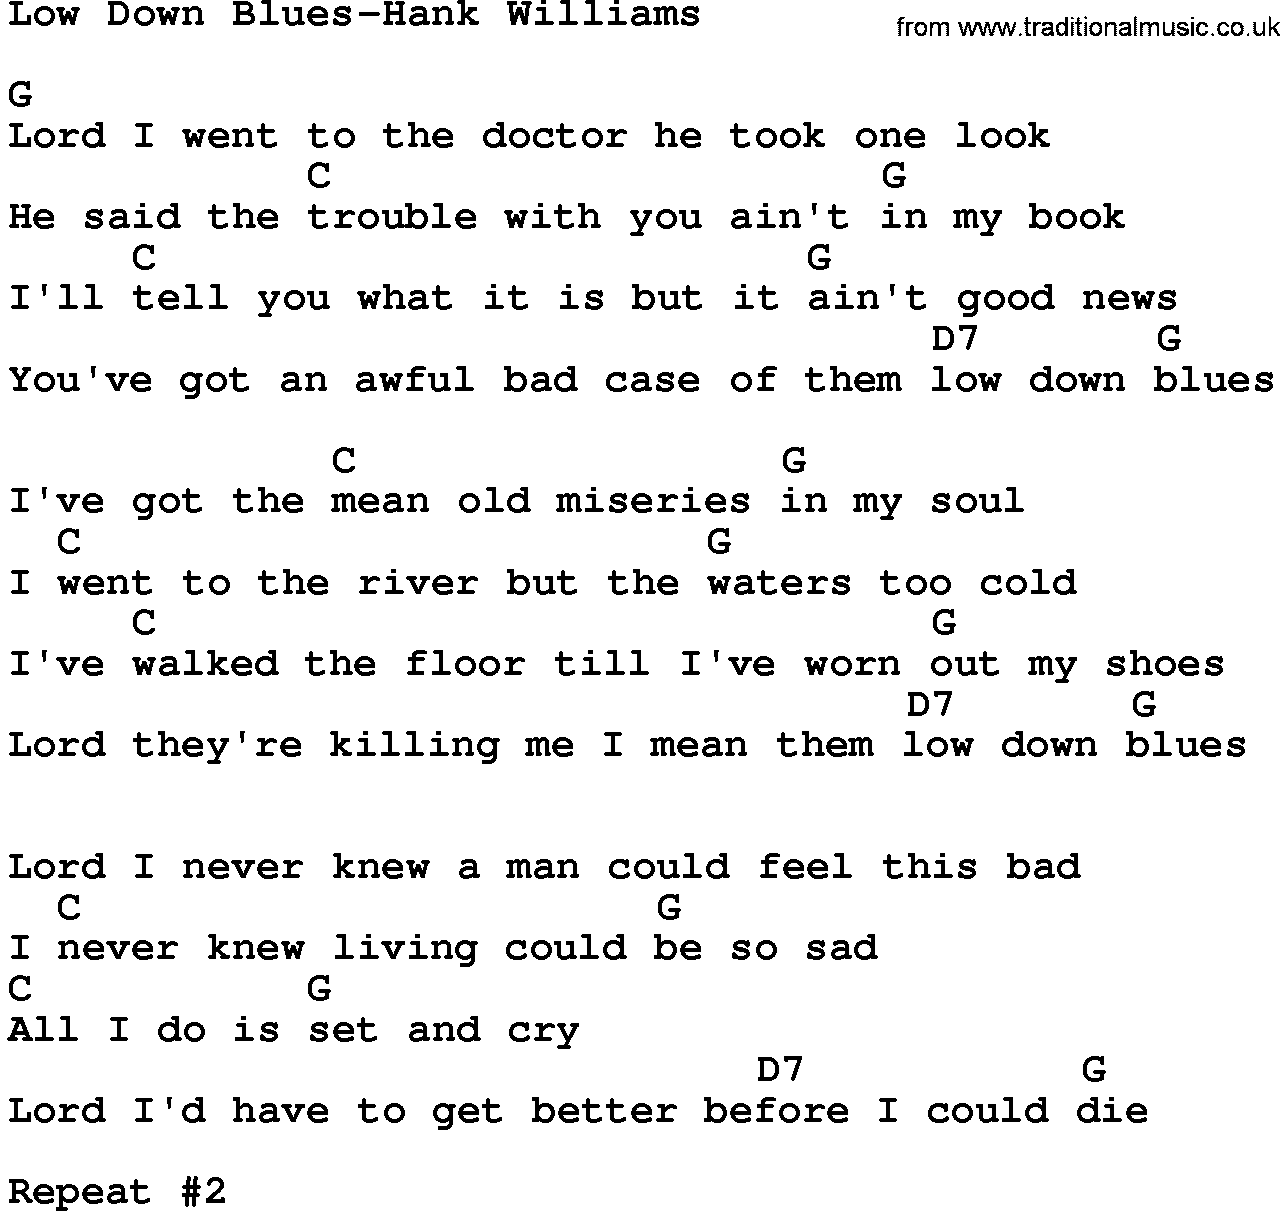 Country music song: Low Down Blues-Hank Williams lyrics and chords